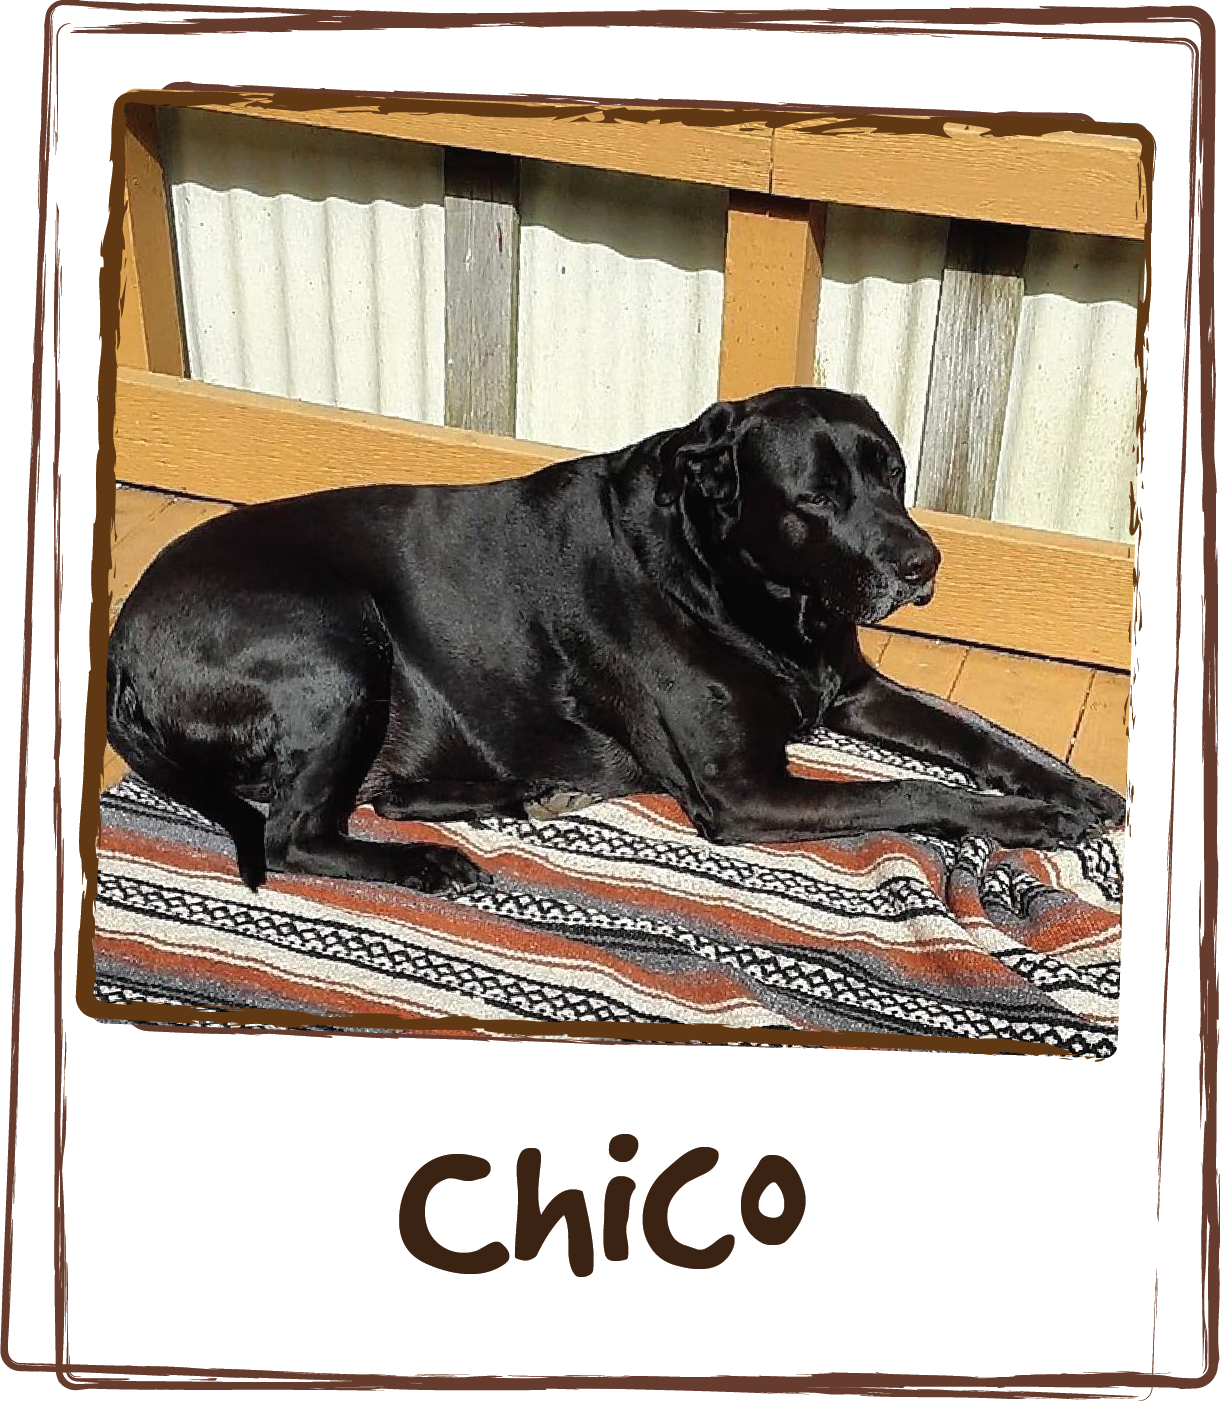  "My big 13 year old CHICO takes elder care daily and he is like a spring chicken !!!! Such an improvement!!! He could barely run let alone play before and now he is so playful and youthful!!! THANK YOU LICKS!!!💙💙💙” 